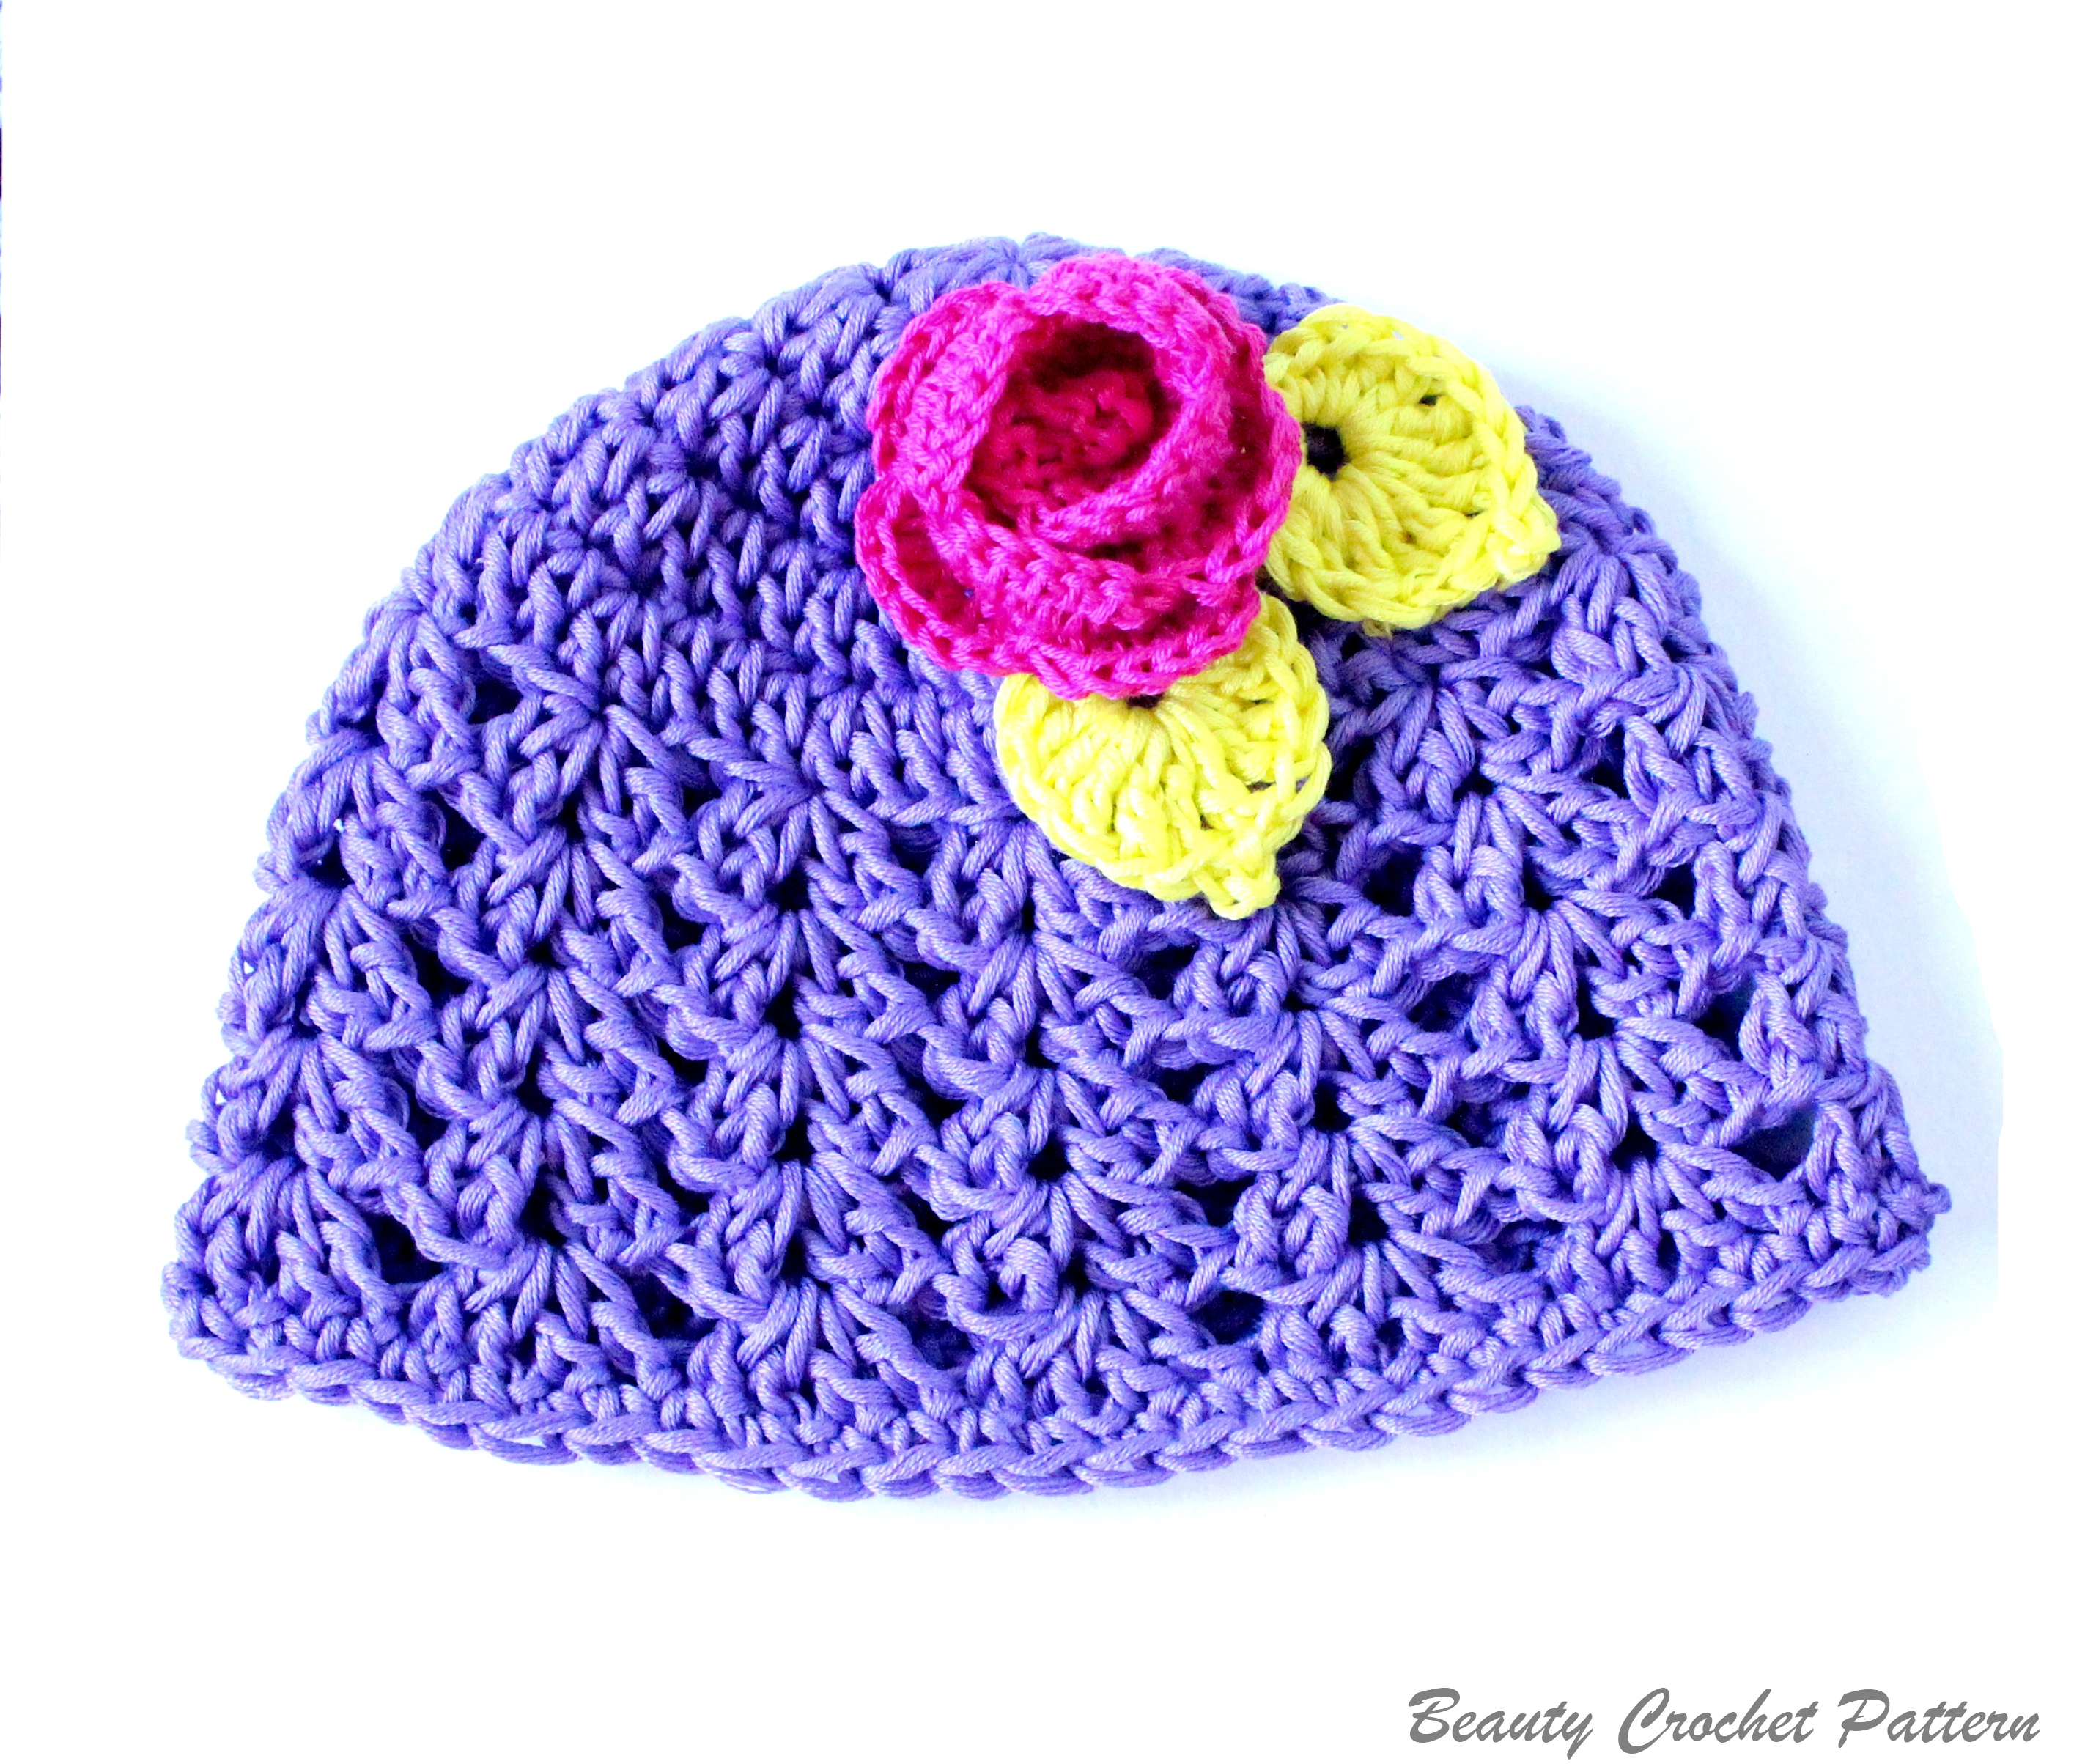 Crochet purple and blue owl  beanie hat with yellow flower